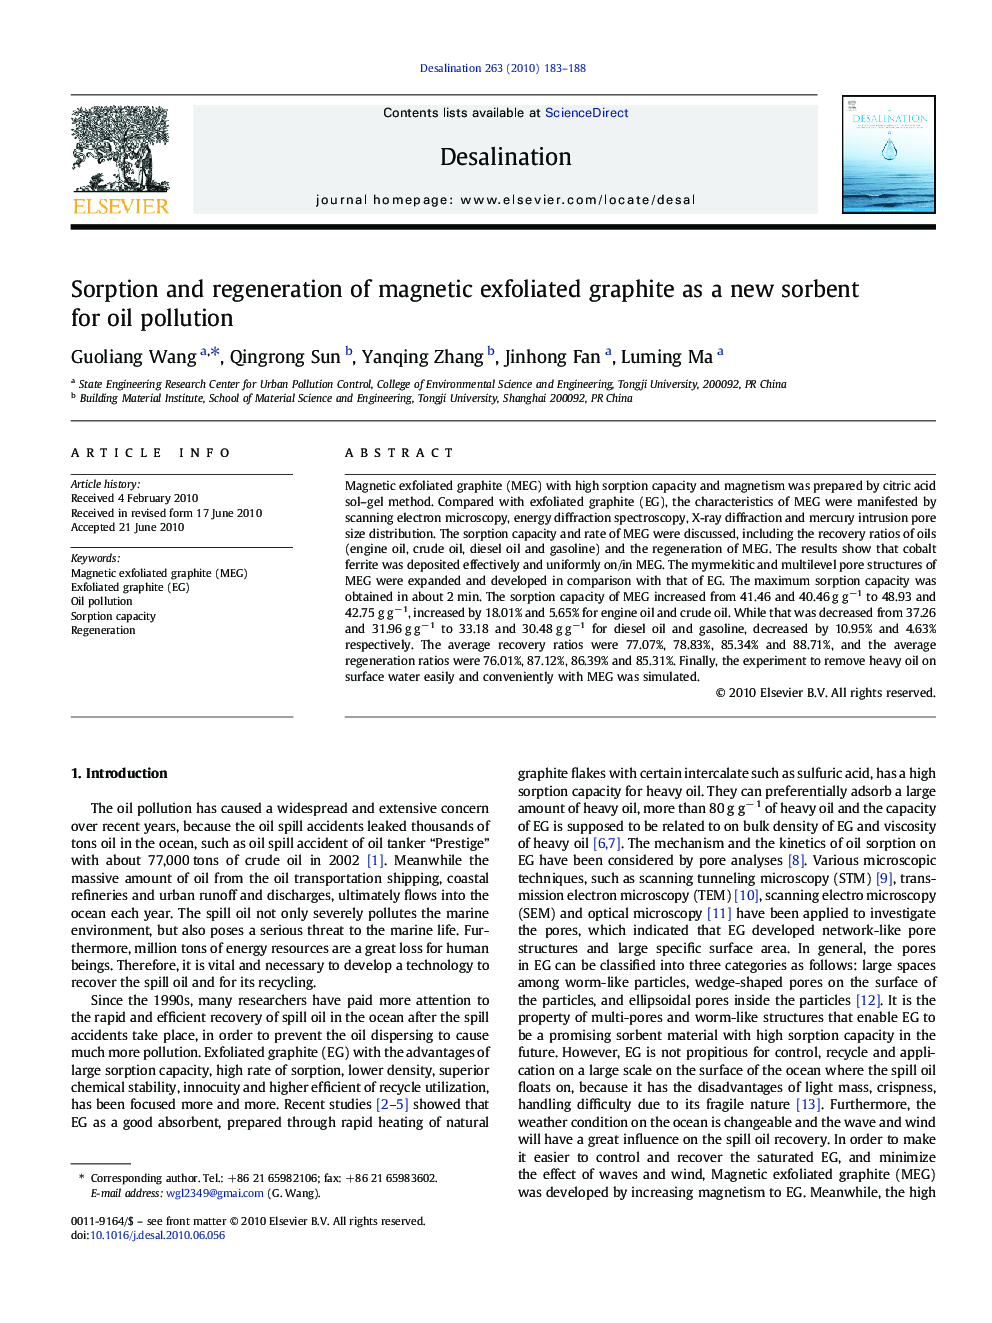 Sorption and regeneration of magnetic exfoliated graphite as a new sorbent for oil pollution